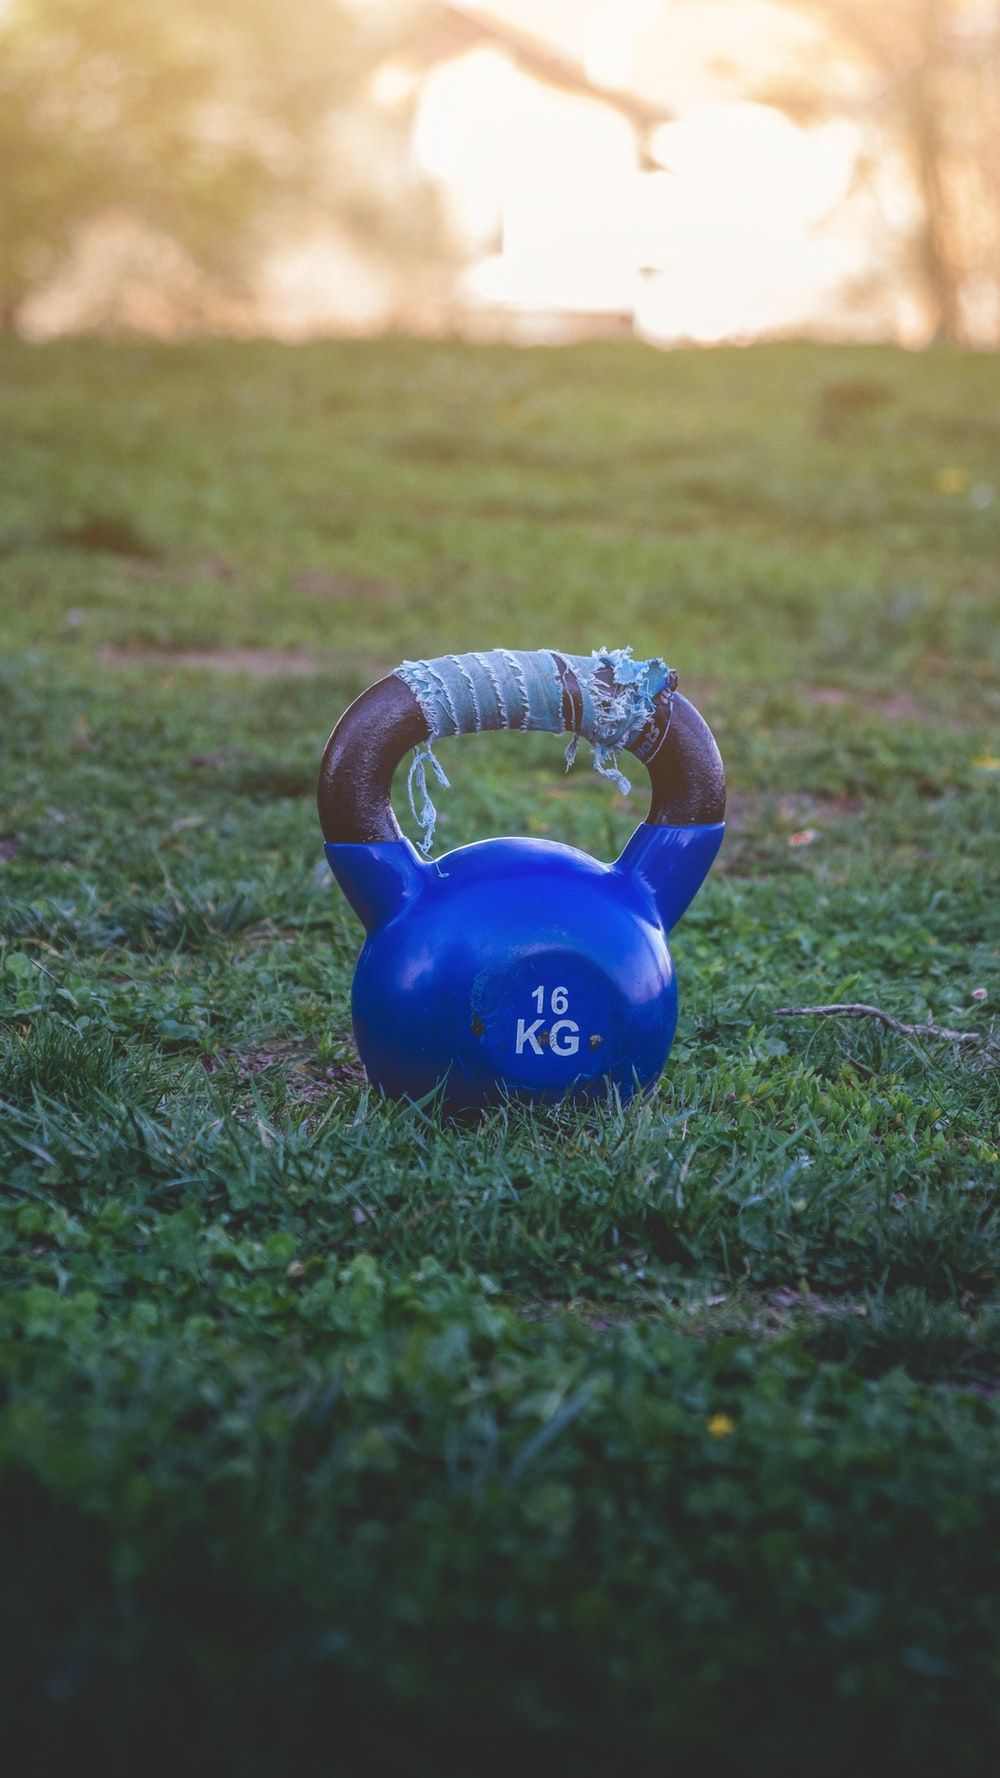 Kettlebell Picture. Download Free Image